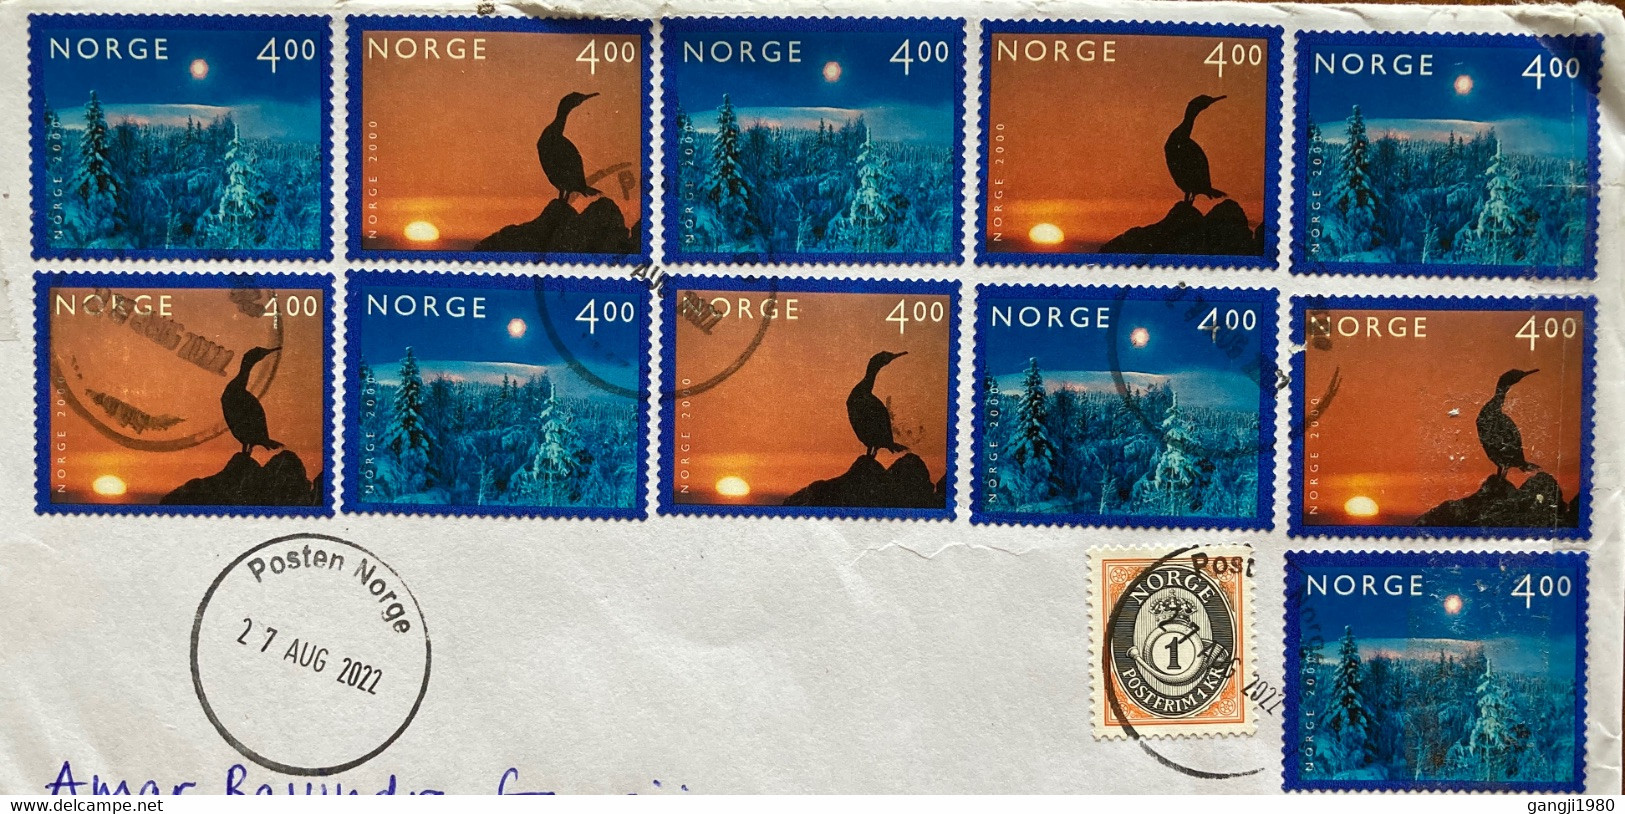 NORWAY,2022,USED COVER 1 SELF ADHESIVE YEAR 2000 MILLENNIUM STAMPS 11 AIRMAIL VIGNETTE,POSTEN NORGE CANCEL TO IN - Briefe U. Dokumente